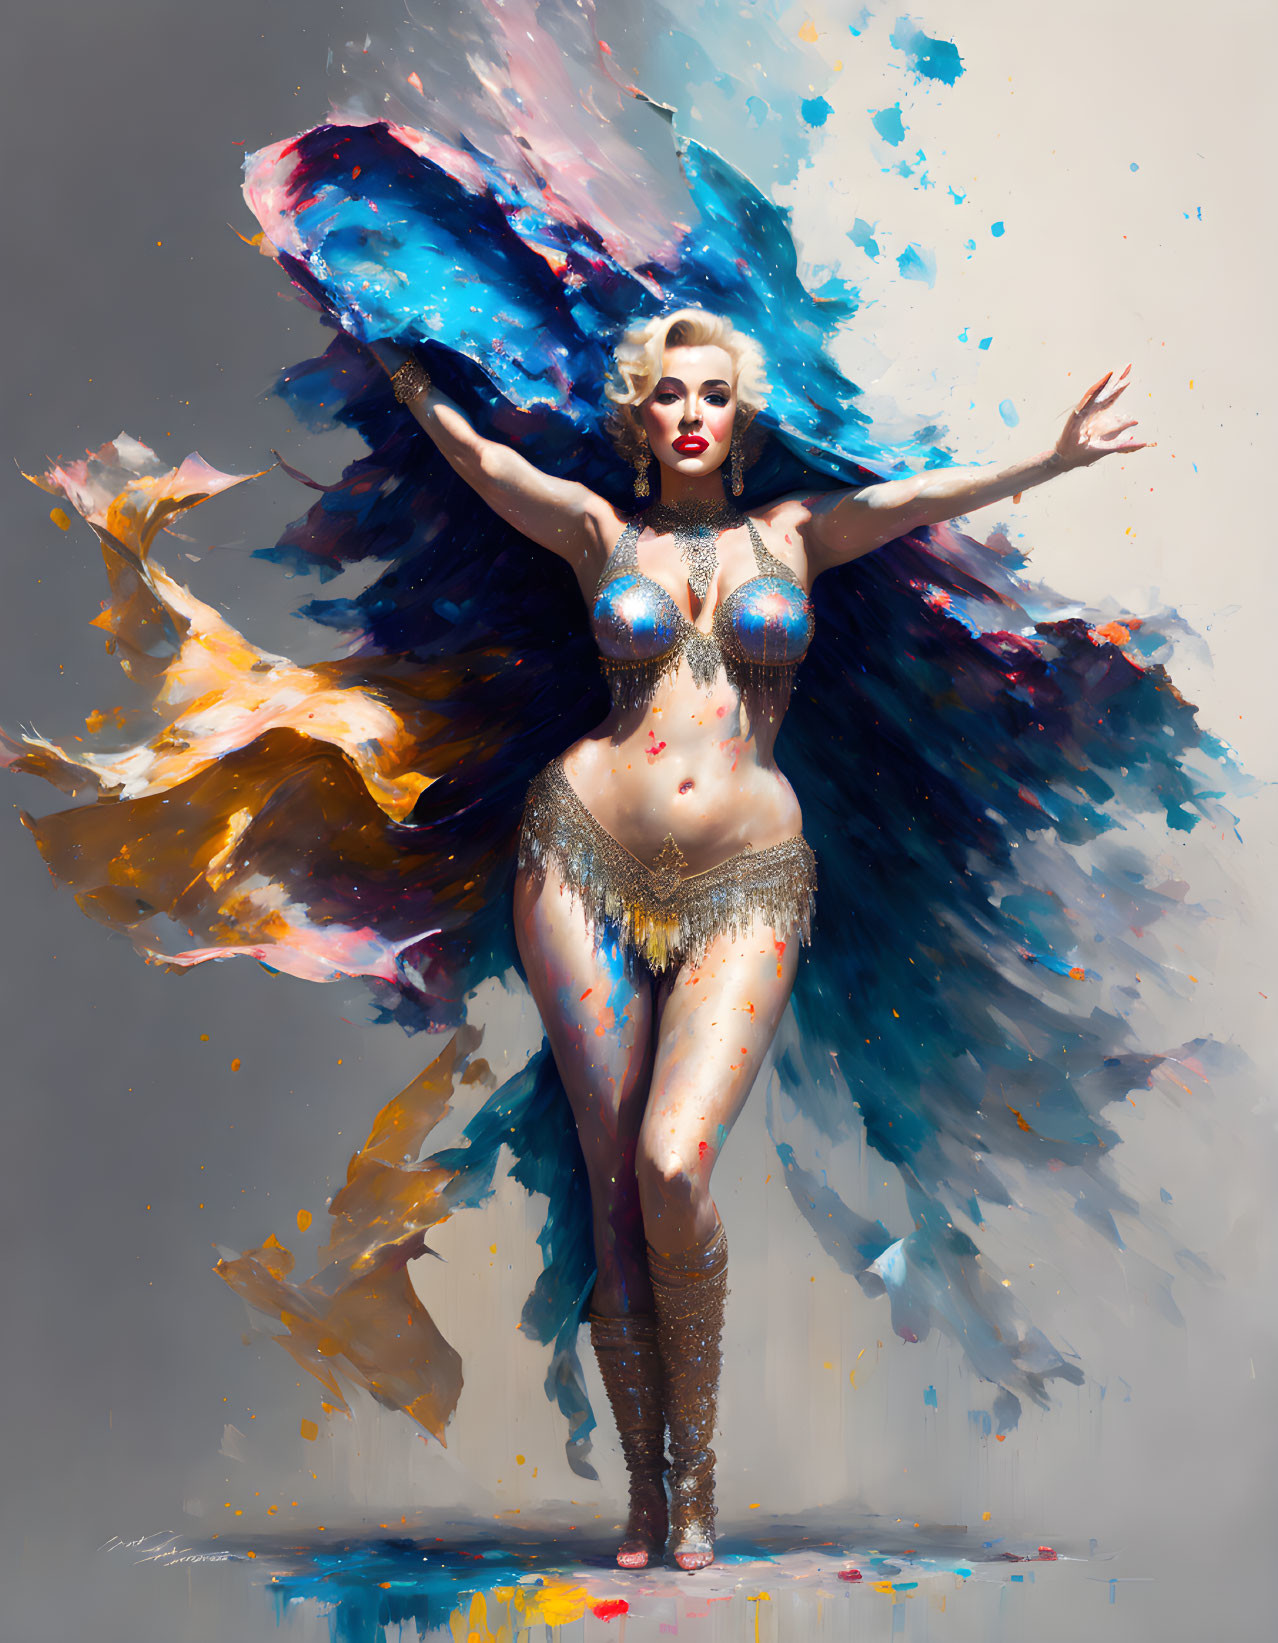 Colorful digital artwork of a woman with paint wings and vintage costume